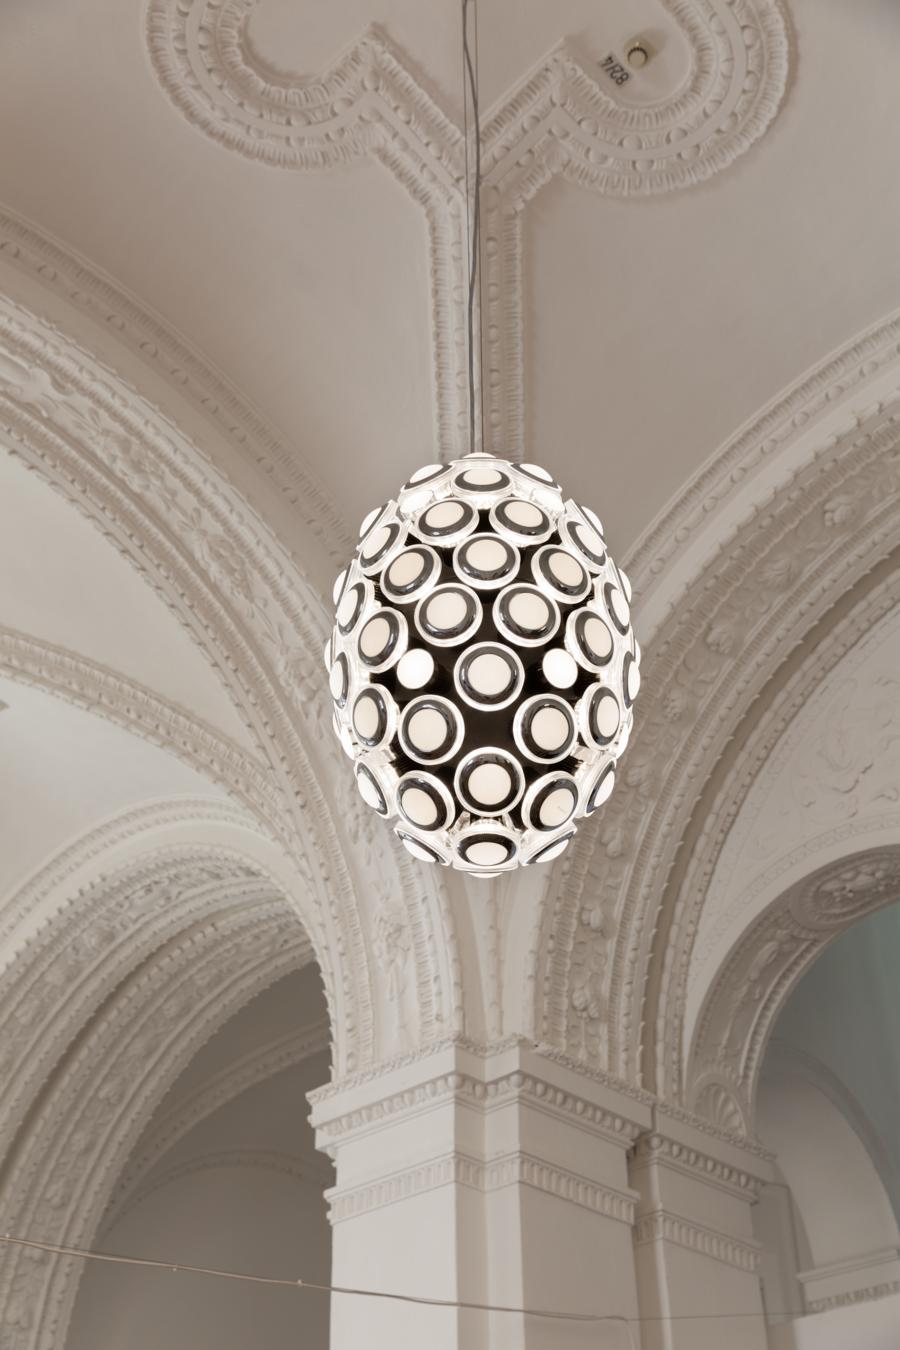 The first sparkle of this great idea was inspired by iconic automotive headlights. They have been modified to design a grand pendant light with a classy, powerful impact for the foyer of the Bavarian National Museum in Germany. The light’s oval